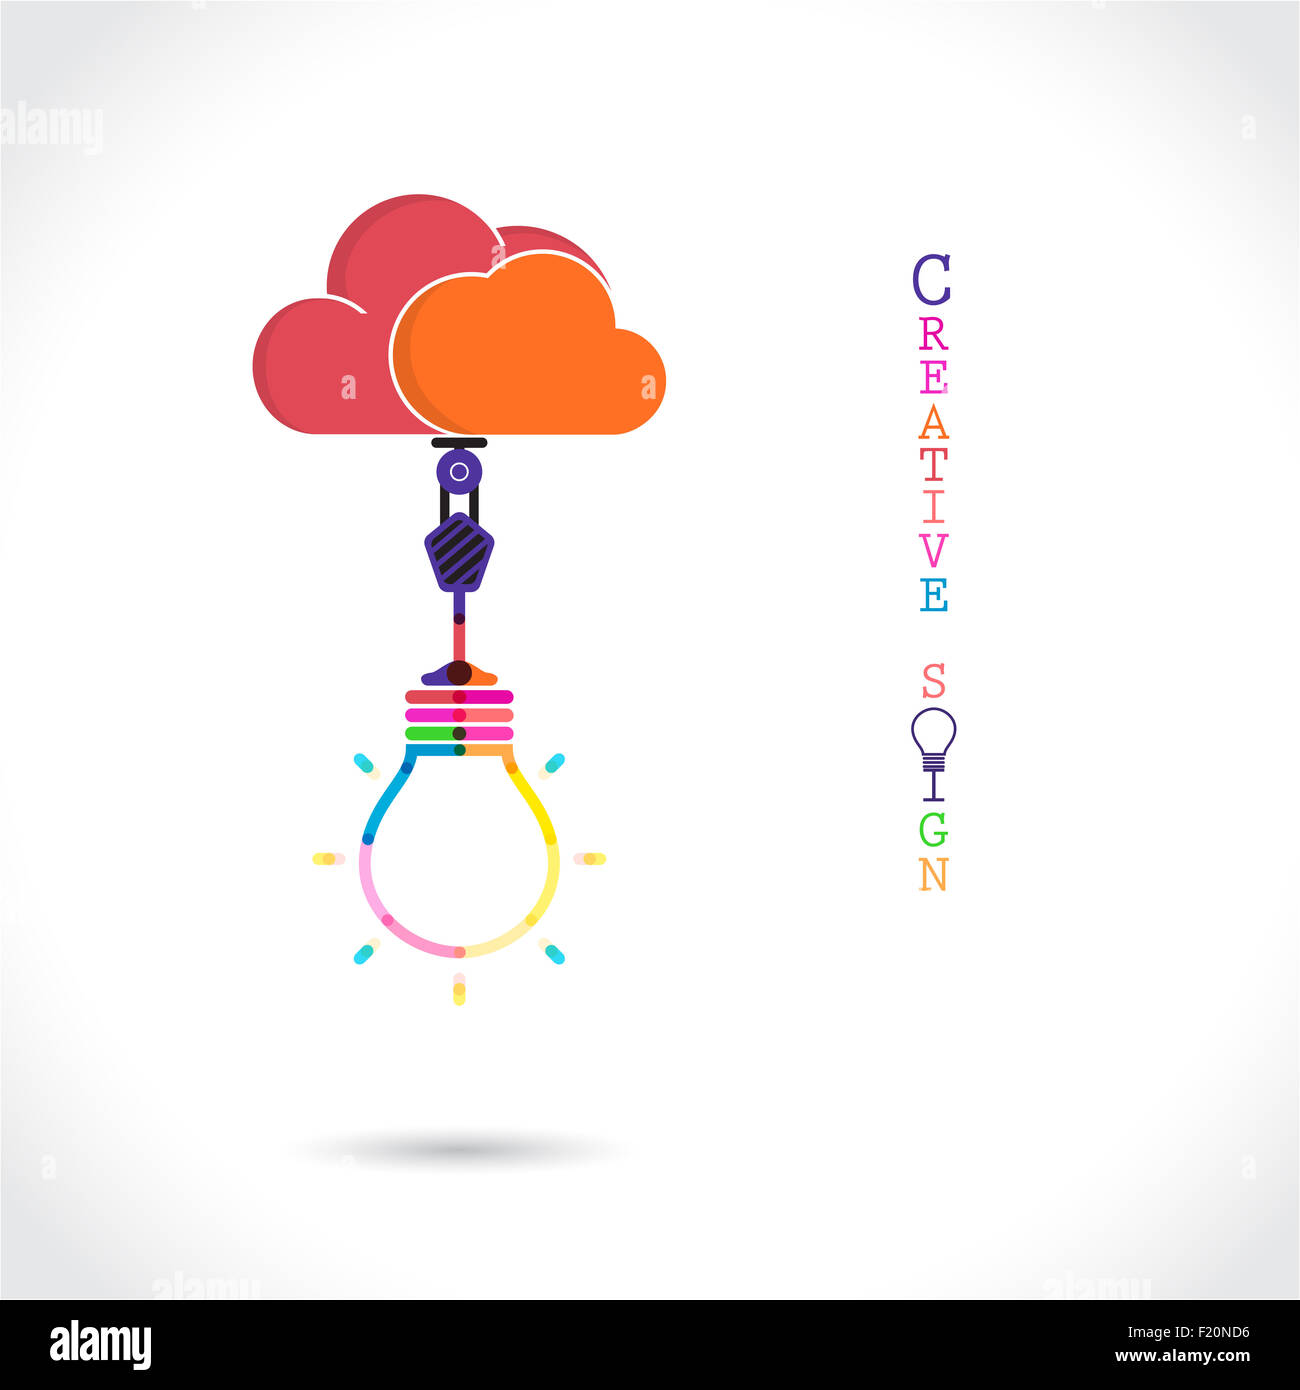 Flat cloud and creative light bulb sign on background for education or business concept. Stock Photo